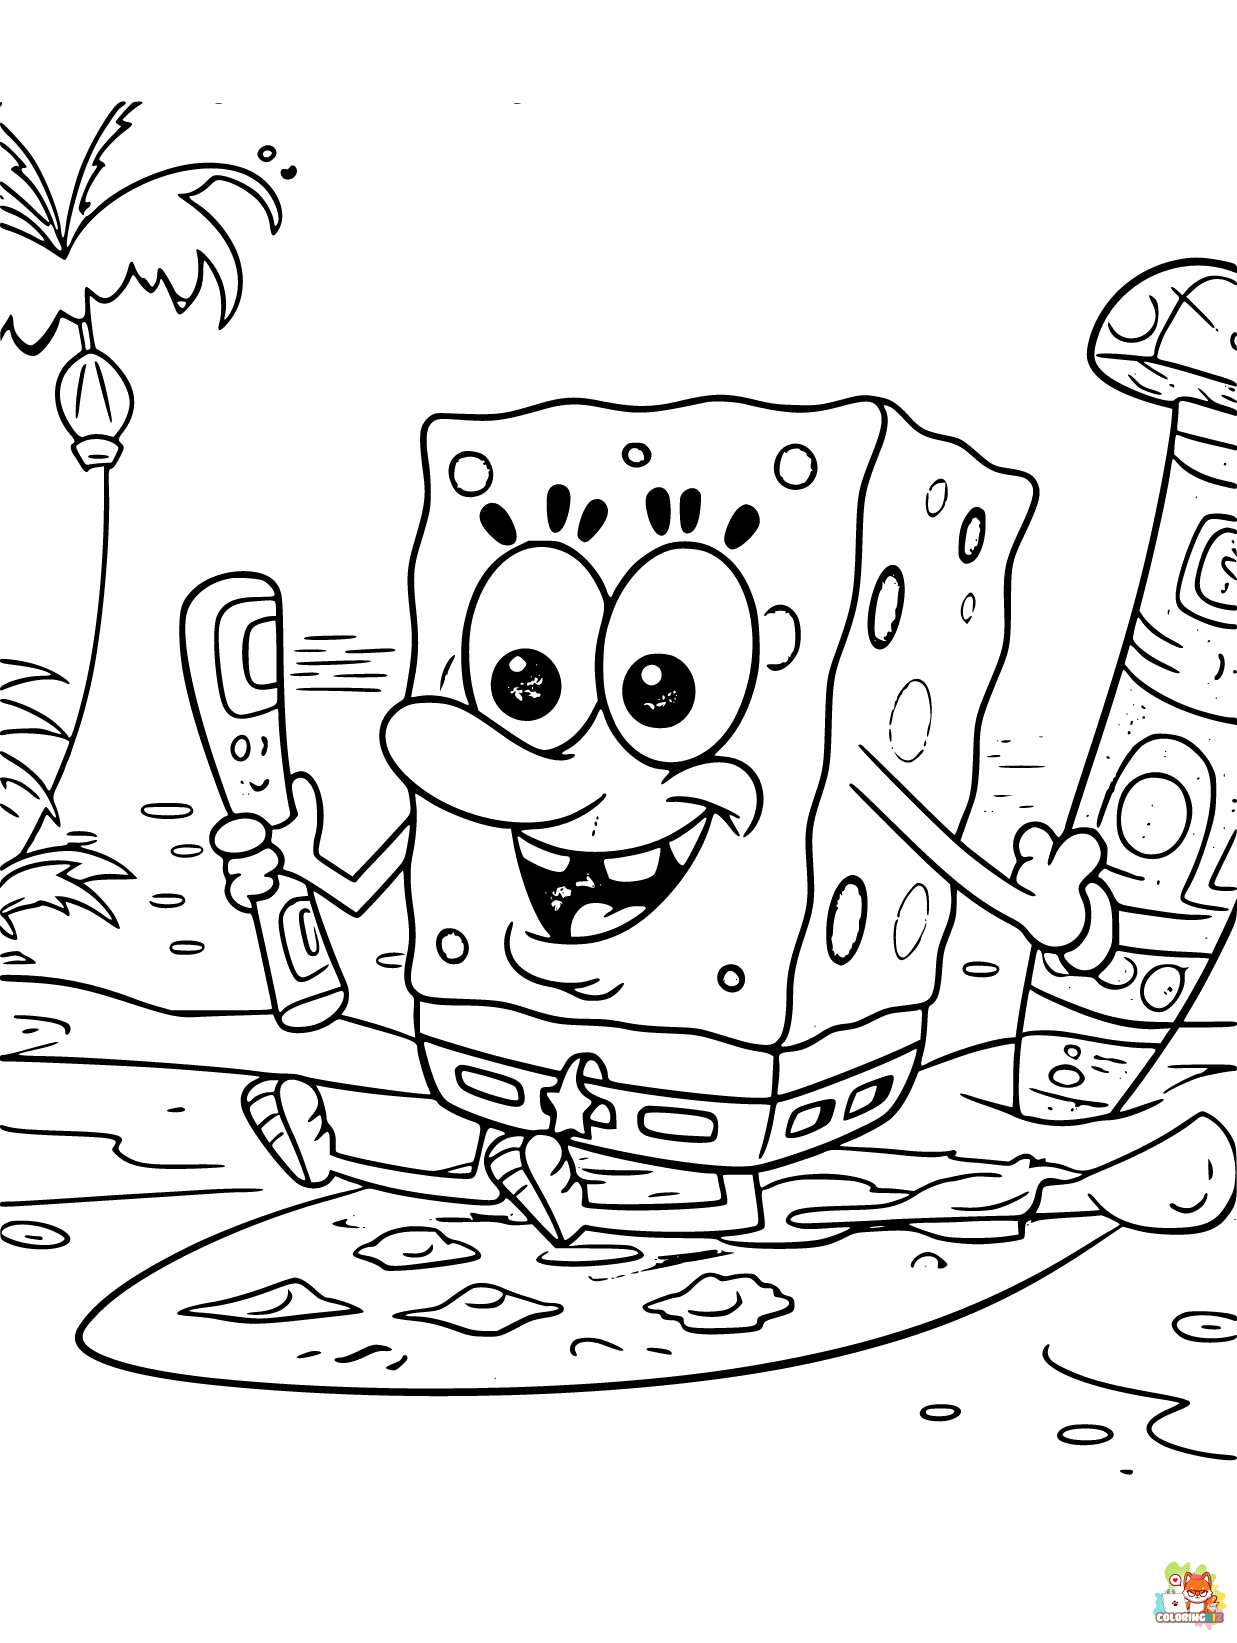 spongebob summer coloring pages free 1